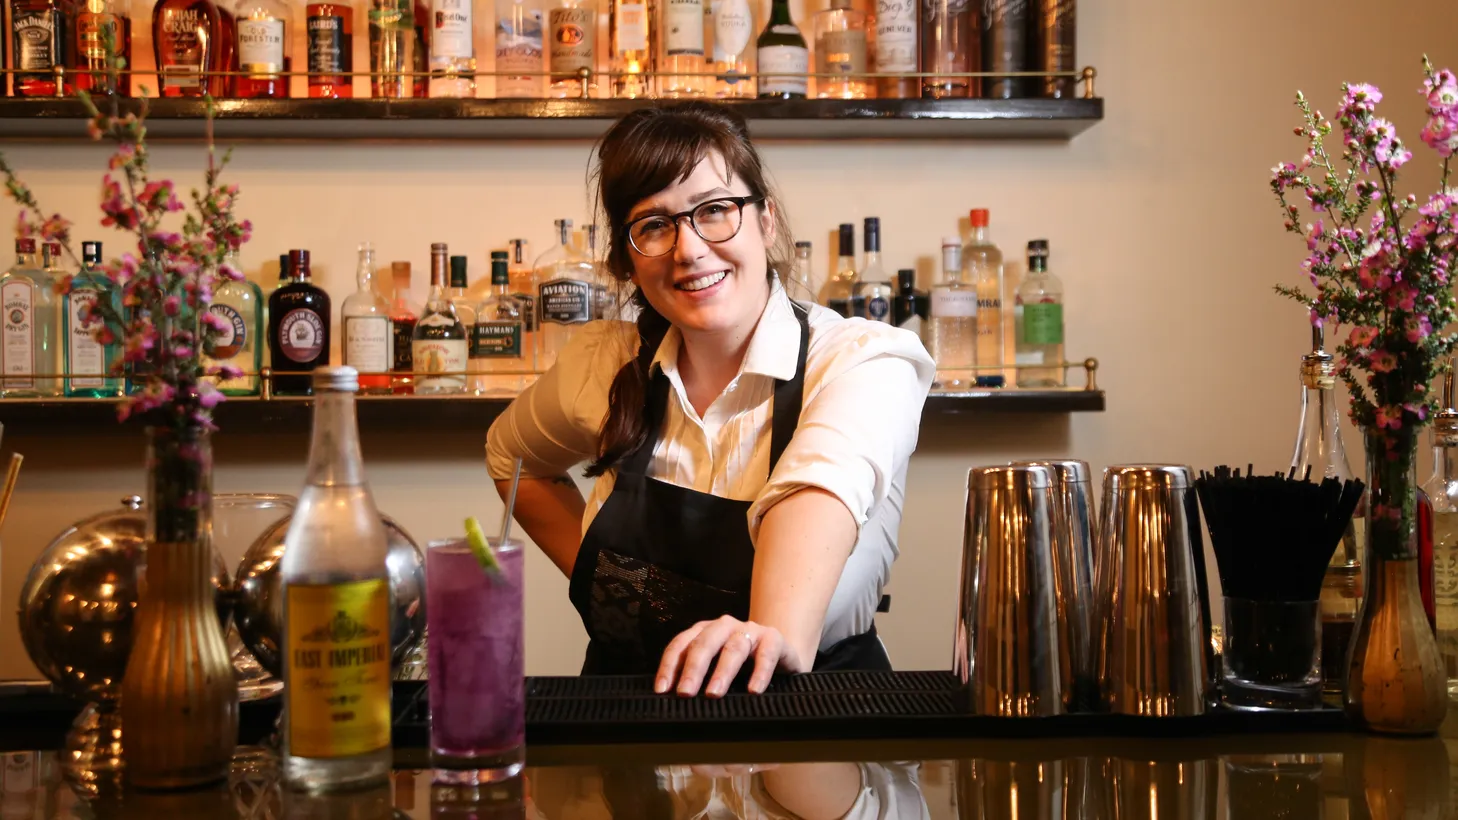 Kelso Norris, Genever’s beverage director, shows off one of her colorful gin creations.